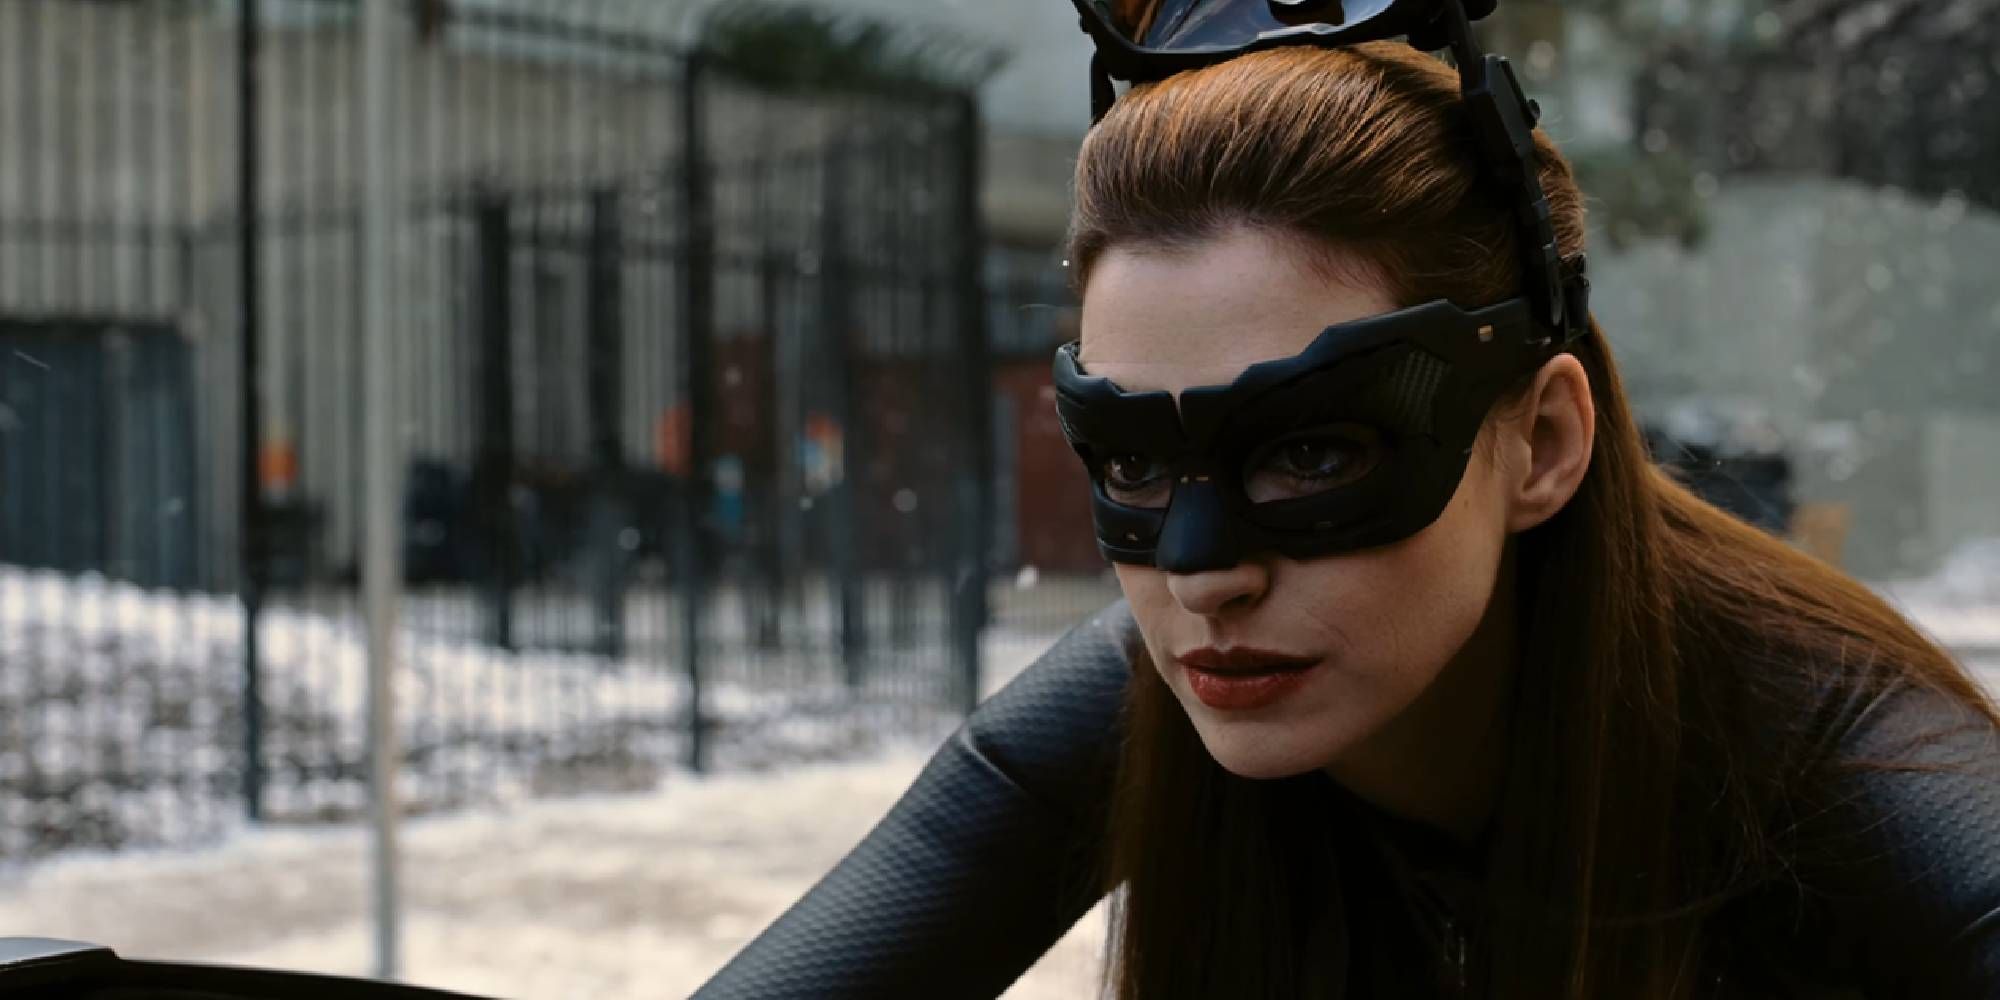 Anne Hathaway as Selina Kyle driving a motorcycle in The Dark Knight Rises close-up shot.